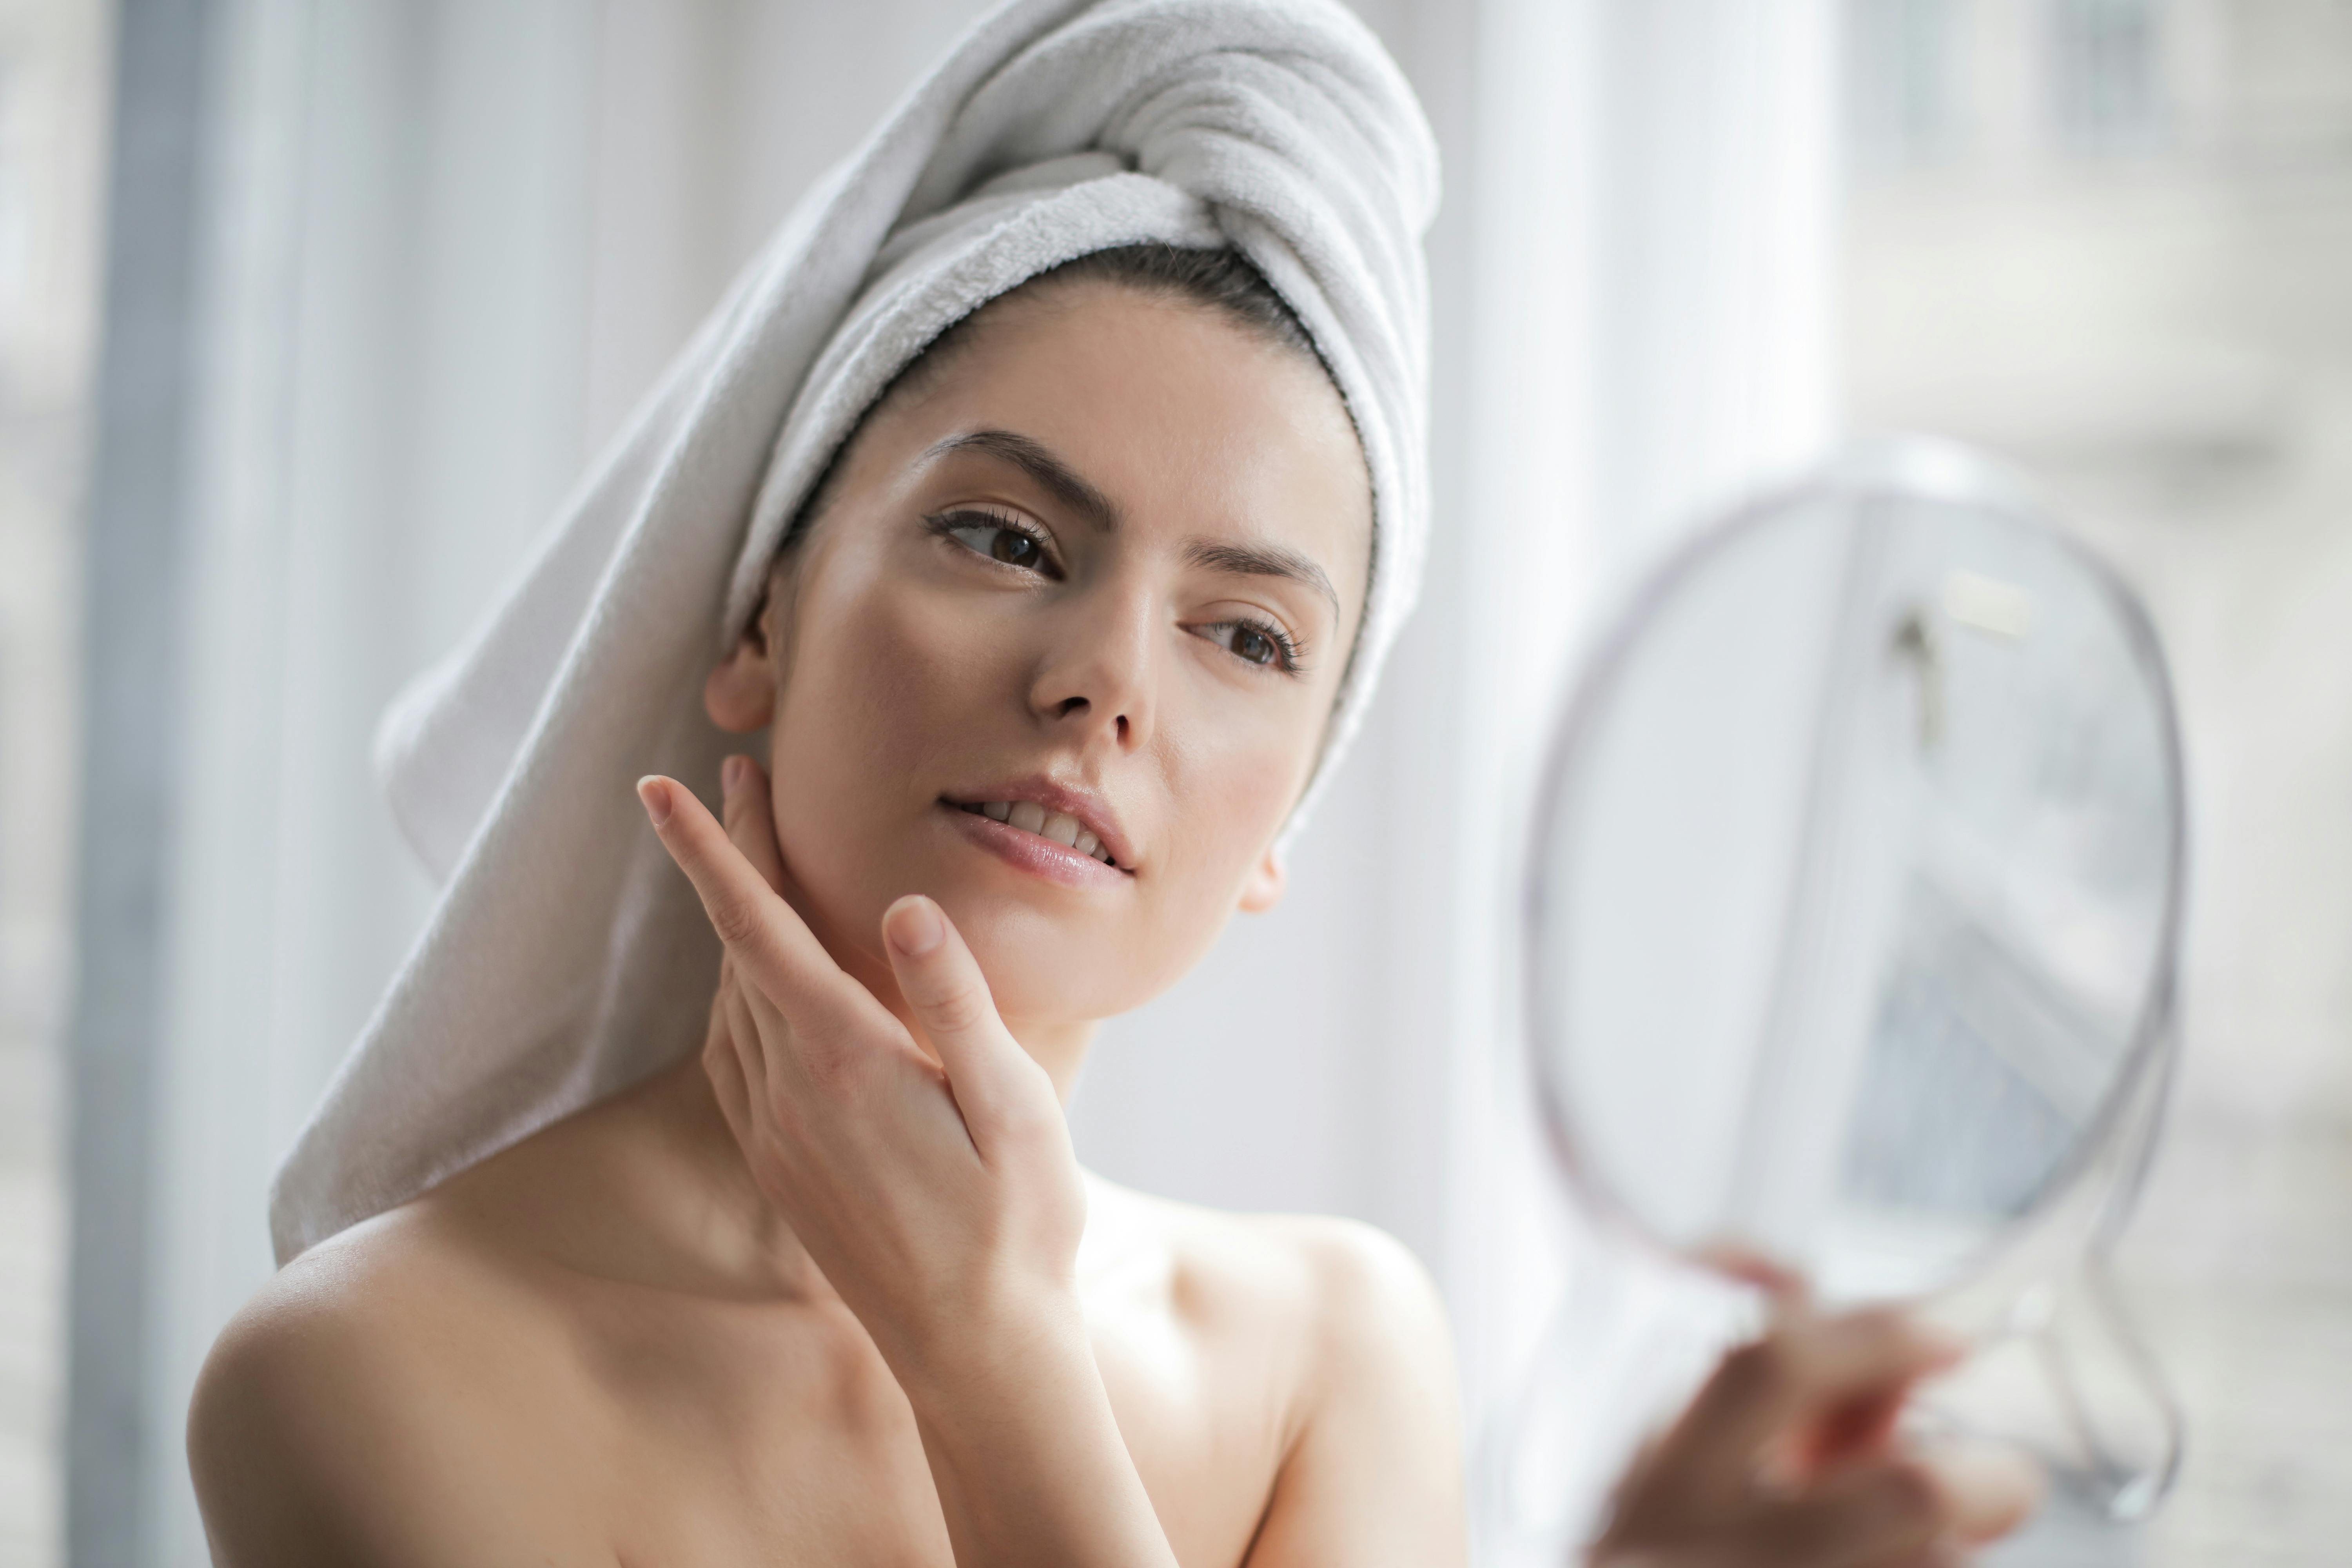 Skin Care Photos, Download The BEST Free Skin Care Stock Photos